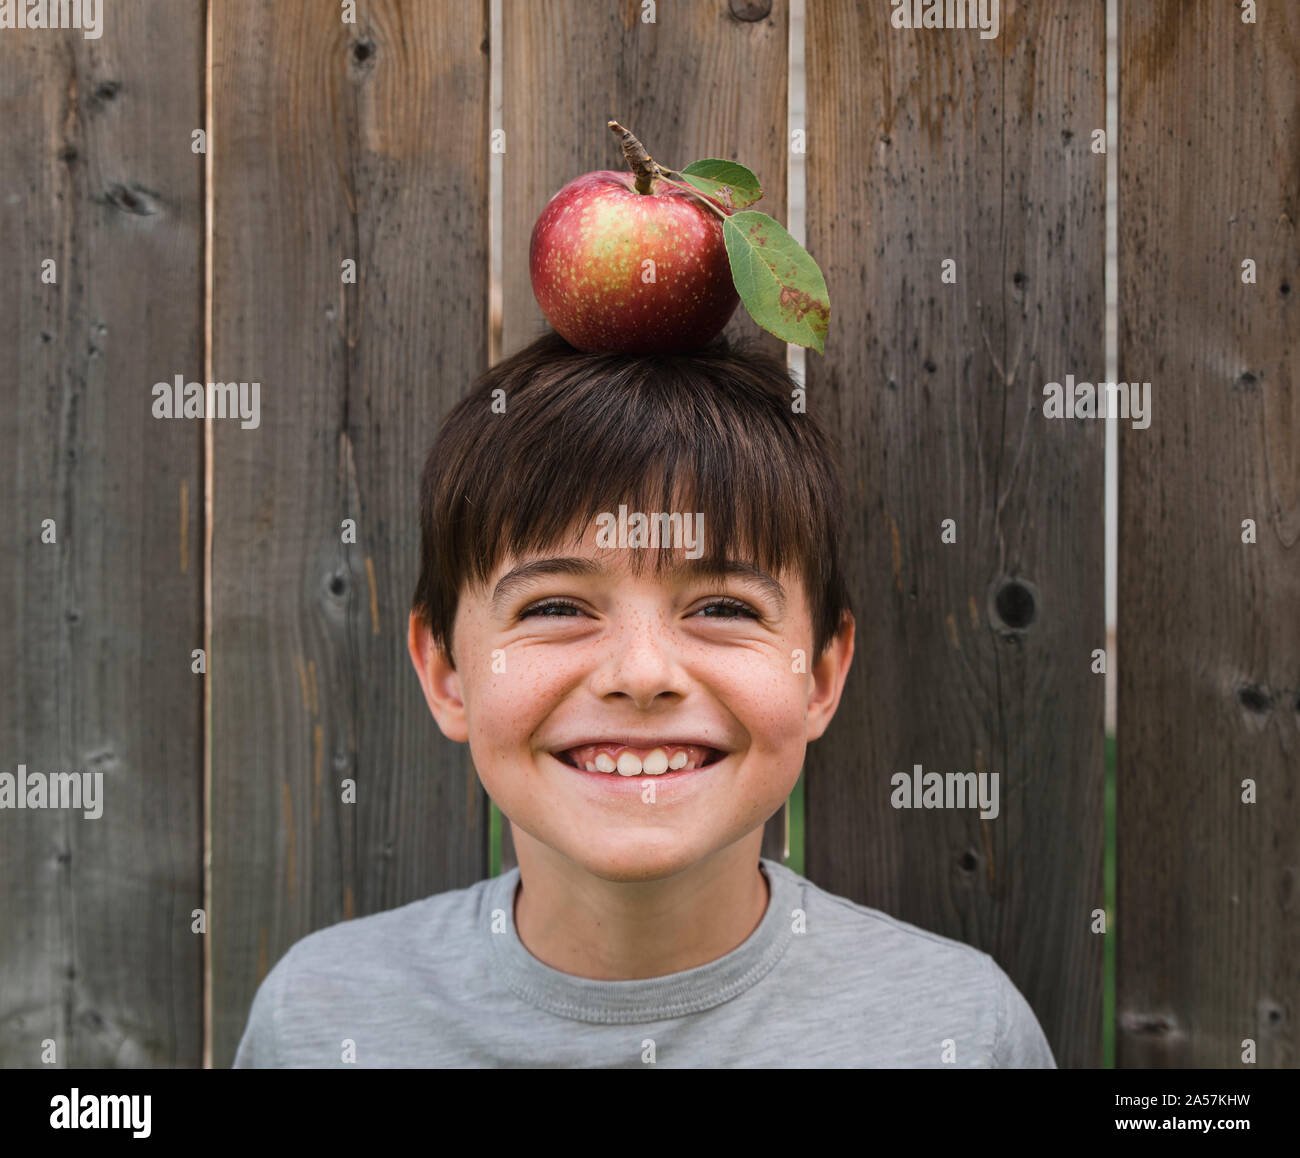 Boy smiling while balancing an apple on his head against wooden fence Stock Photo